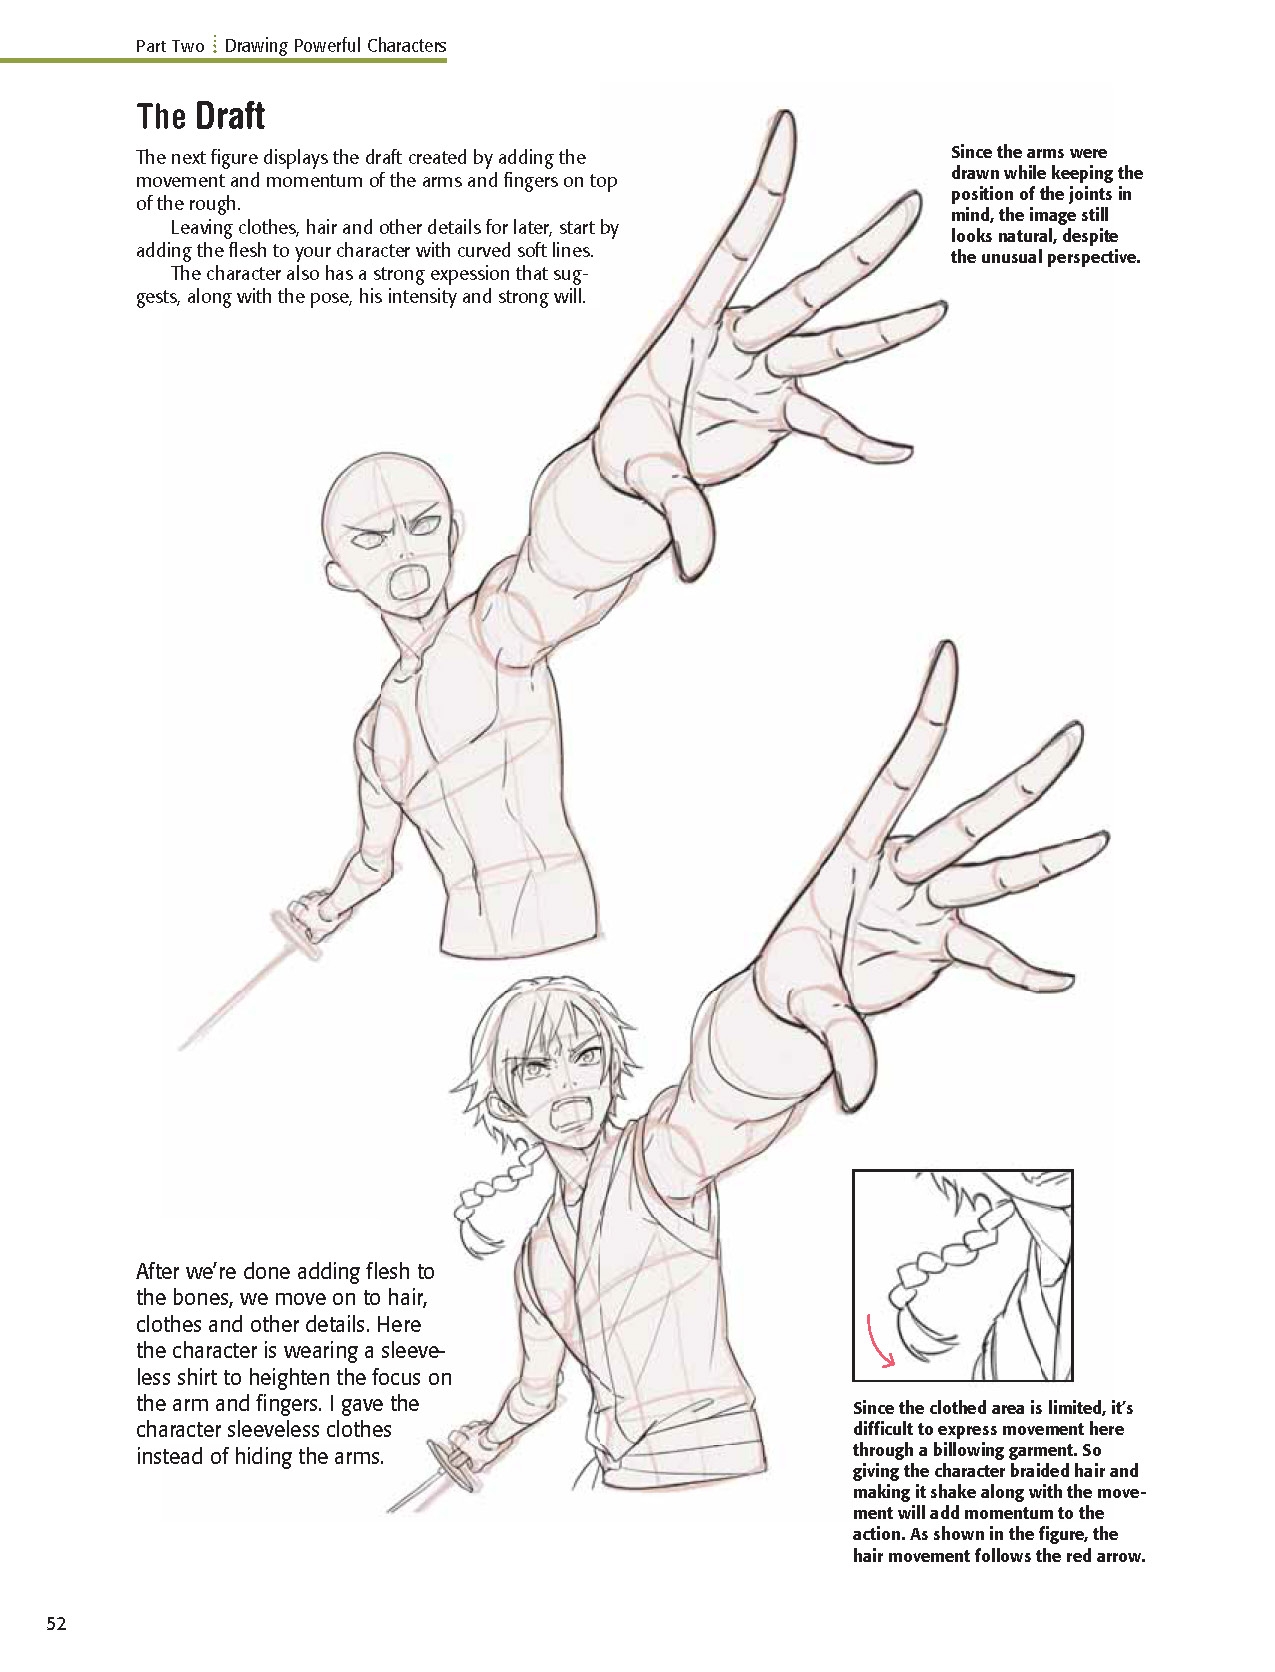 The Complete Guide to Drawing Dynamic Manga Sword Fighters: (An Action-Packed Guide with Over 600 illustrations) 53